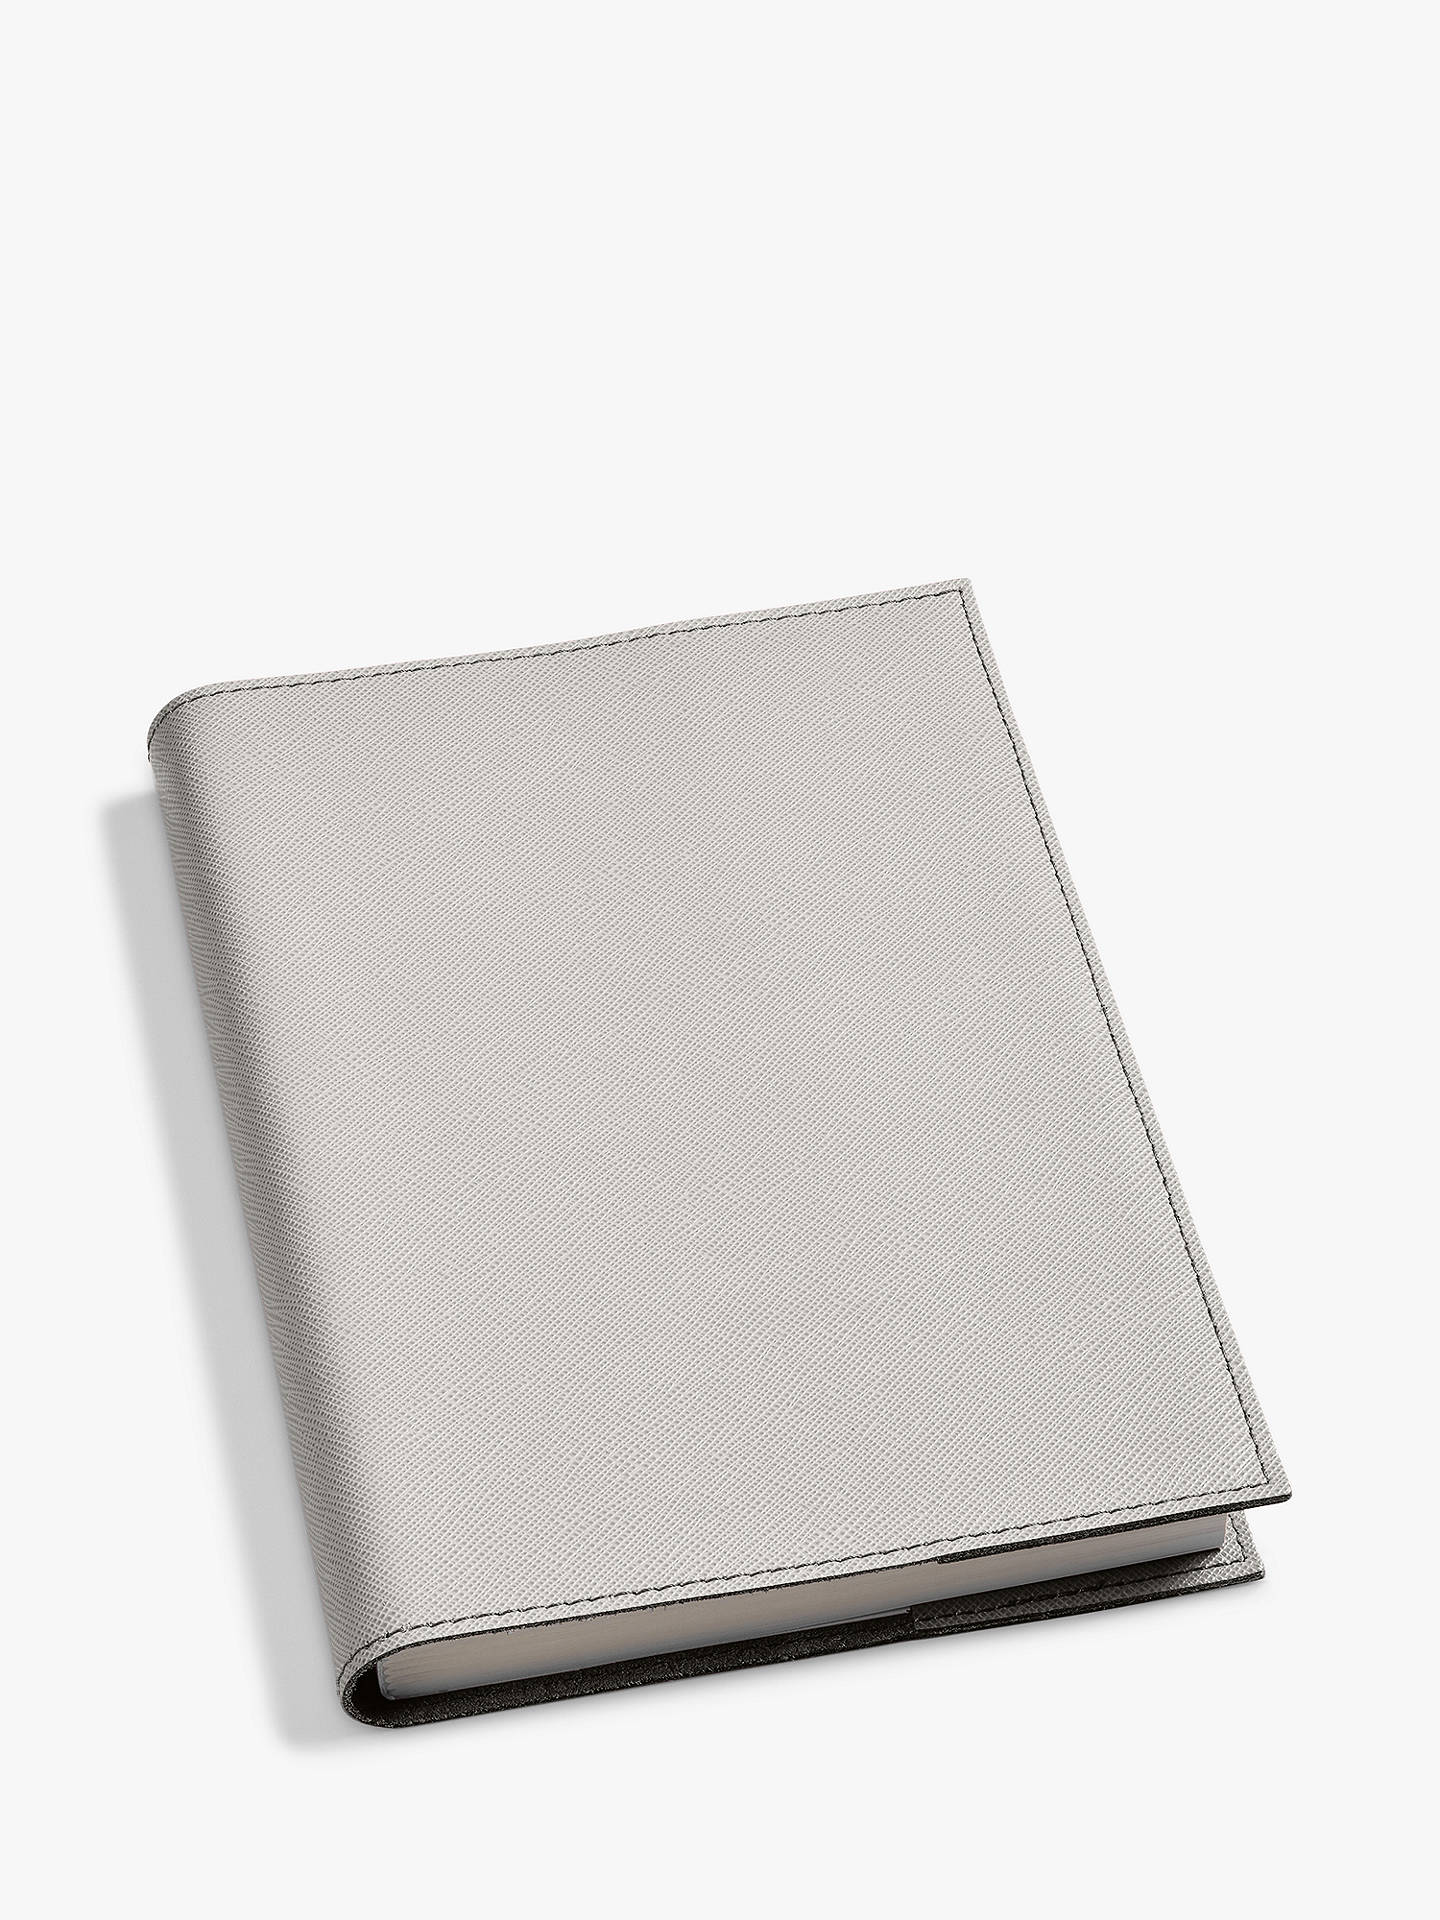 Aspinal of London A5 Refillable Leather Journal at John Lewis & Partners